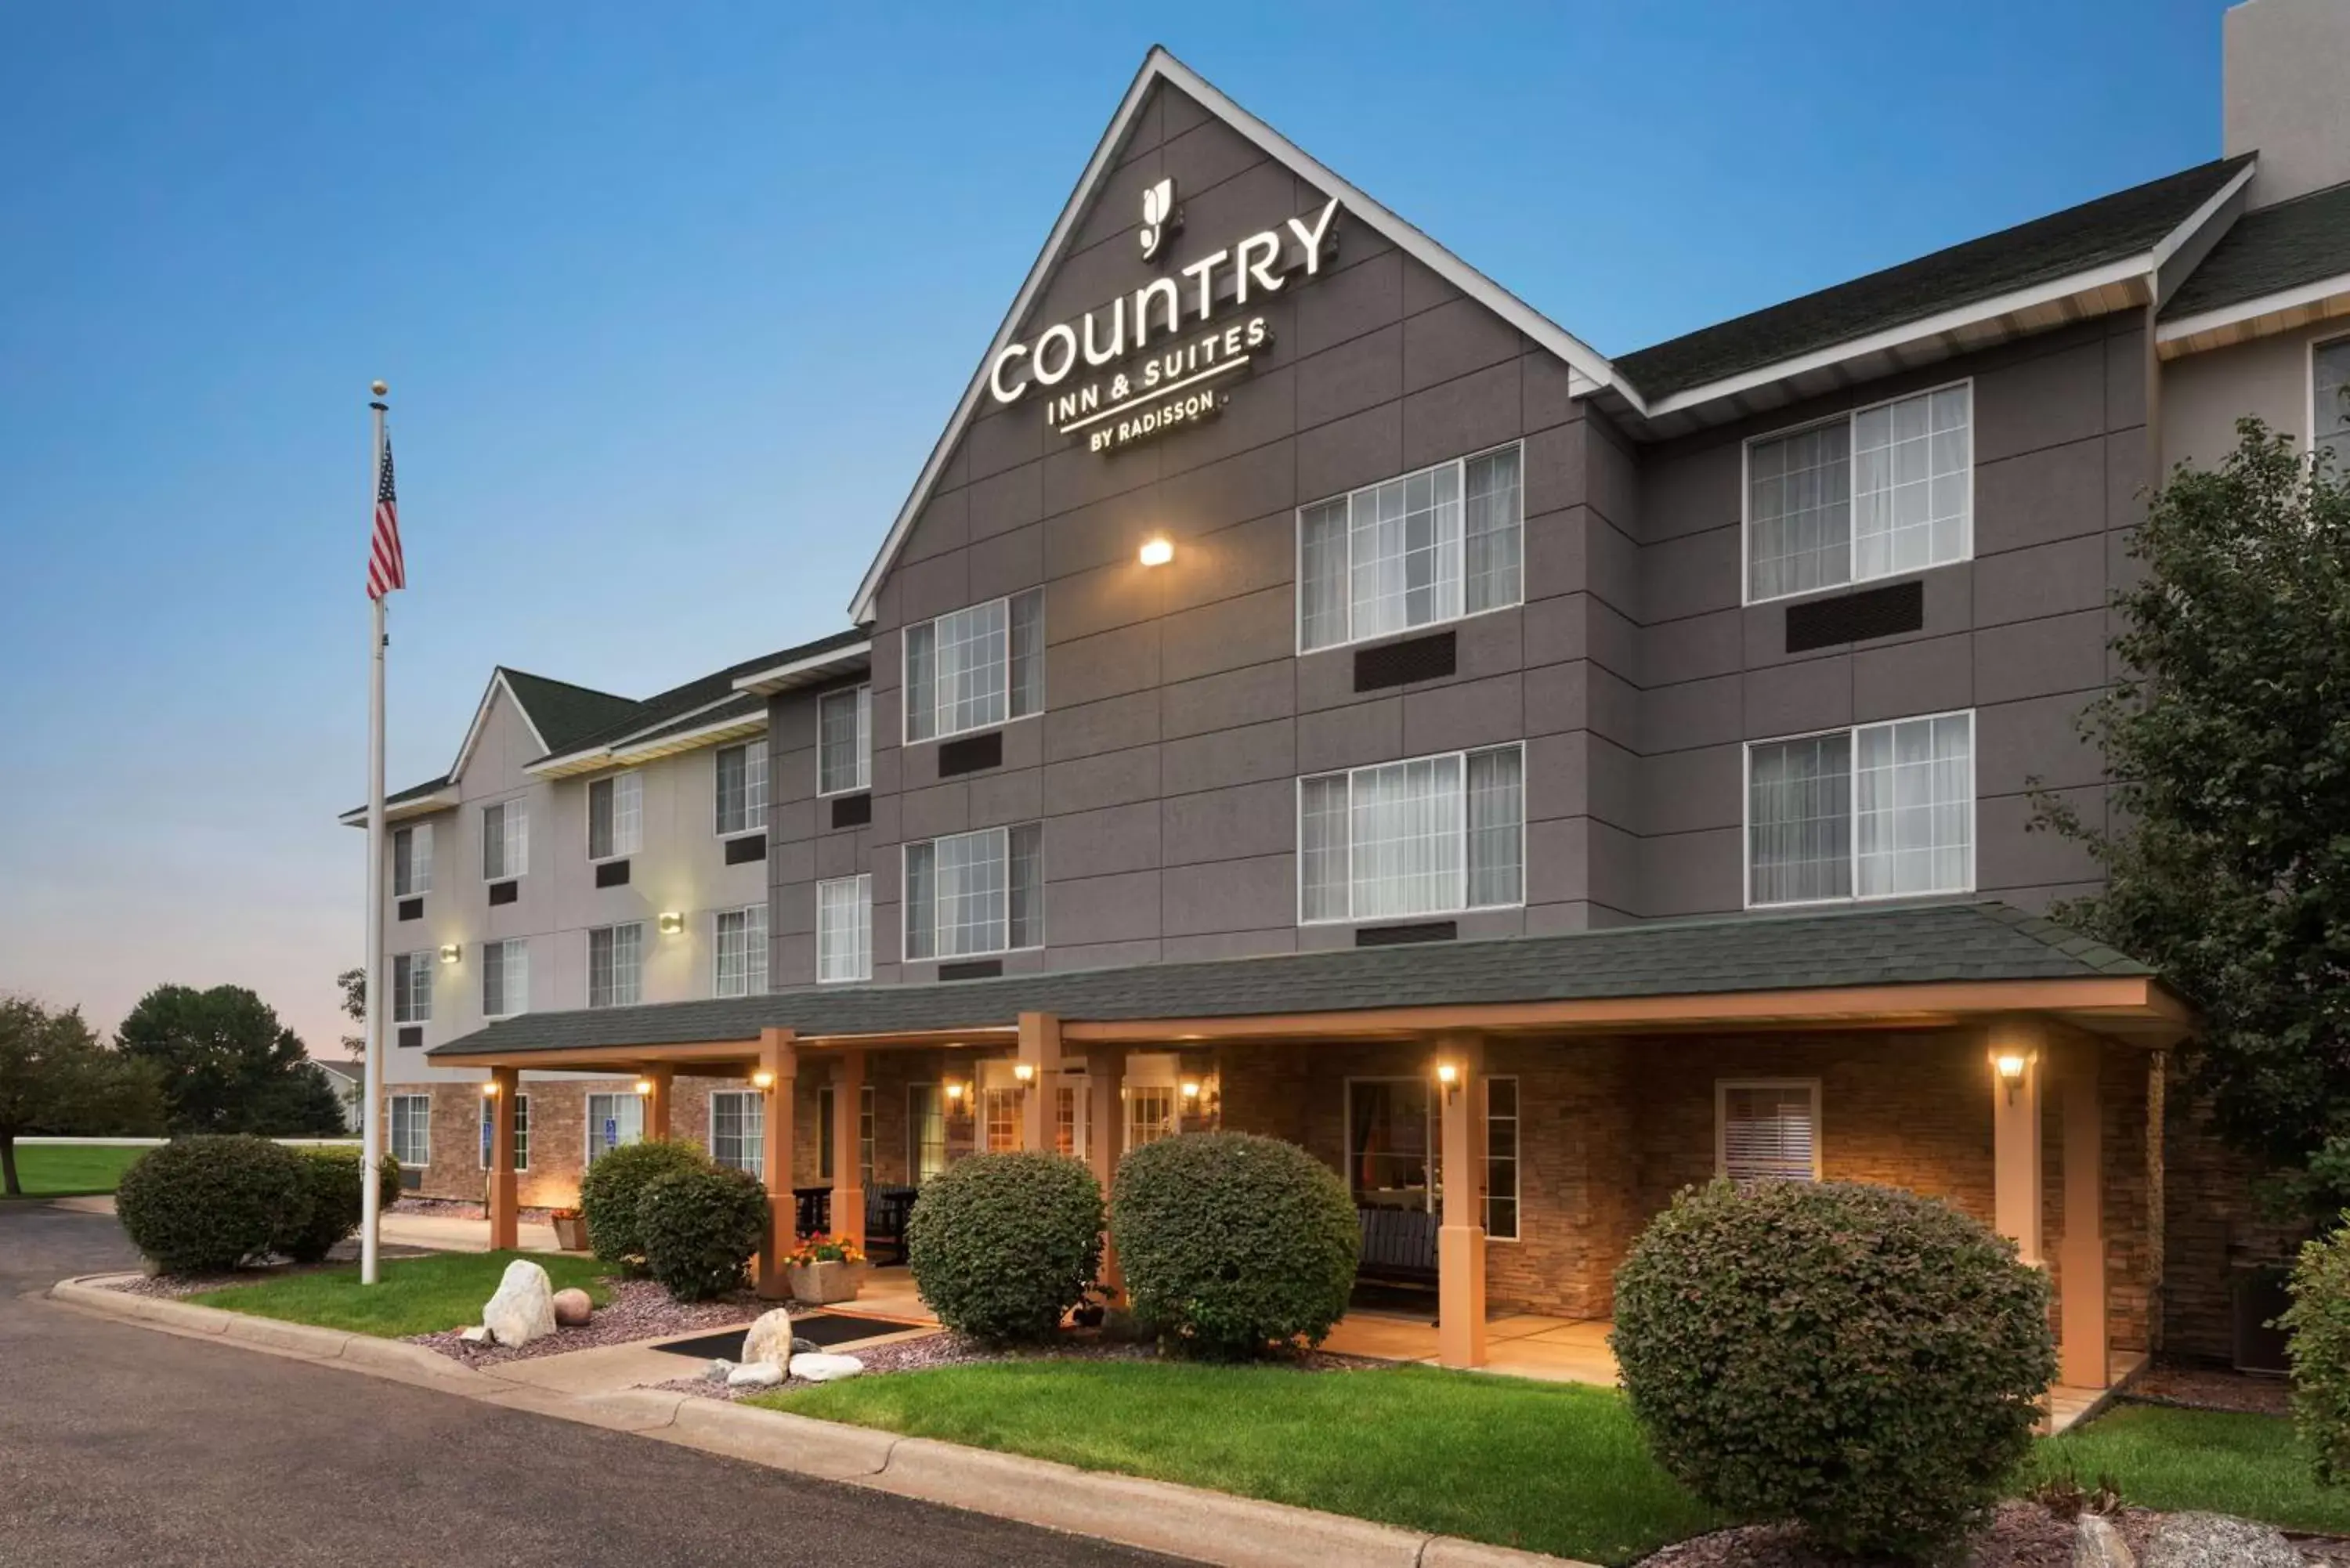 Property building in Country Inn & Suites by Radisson, Minneapolis/Shakopee, MN